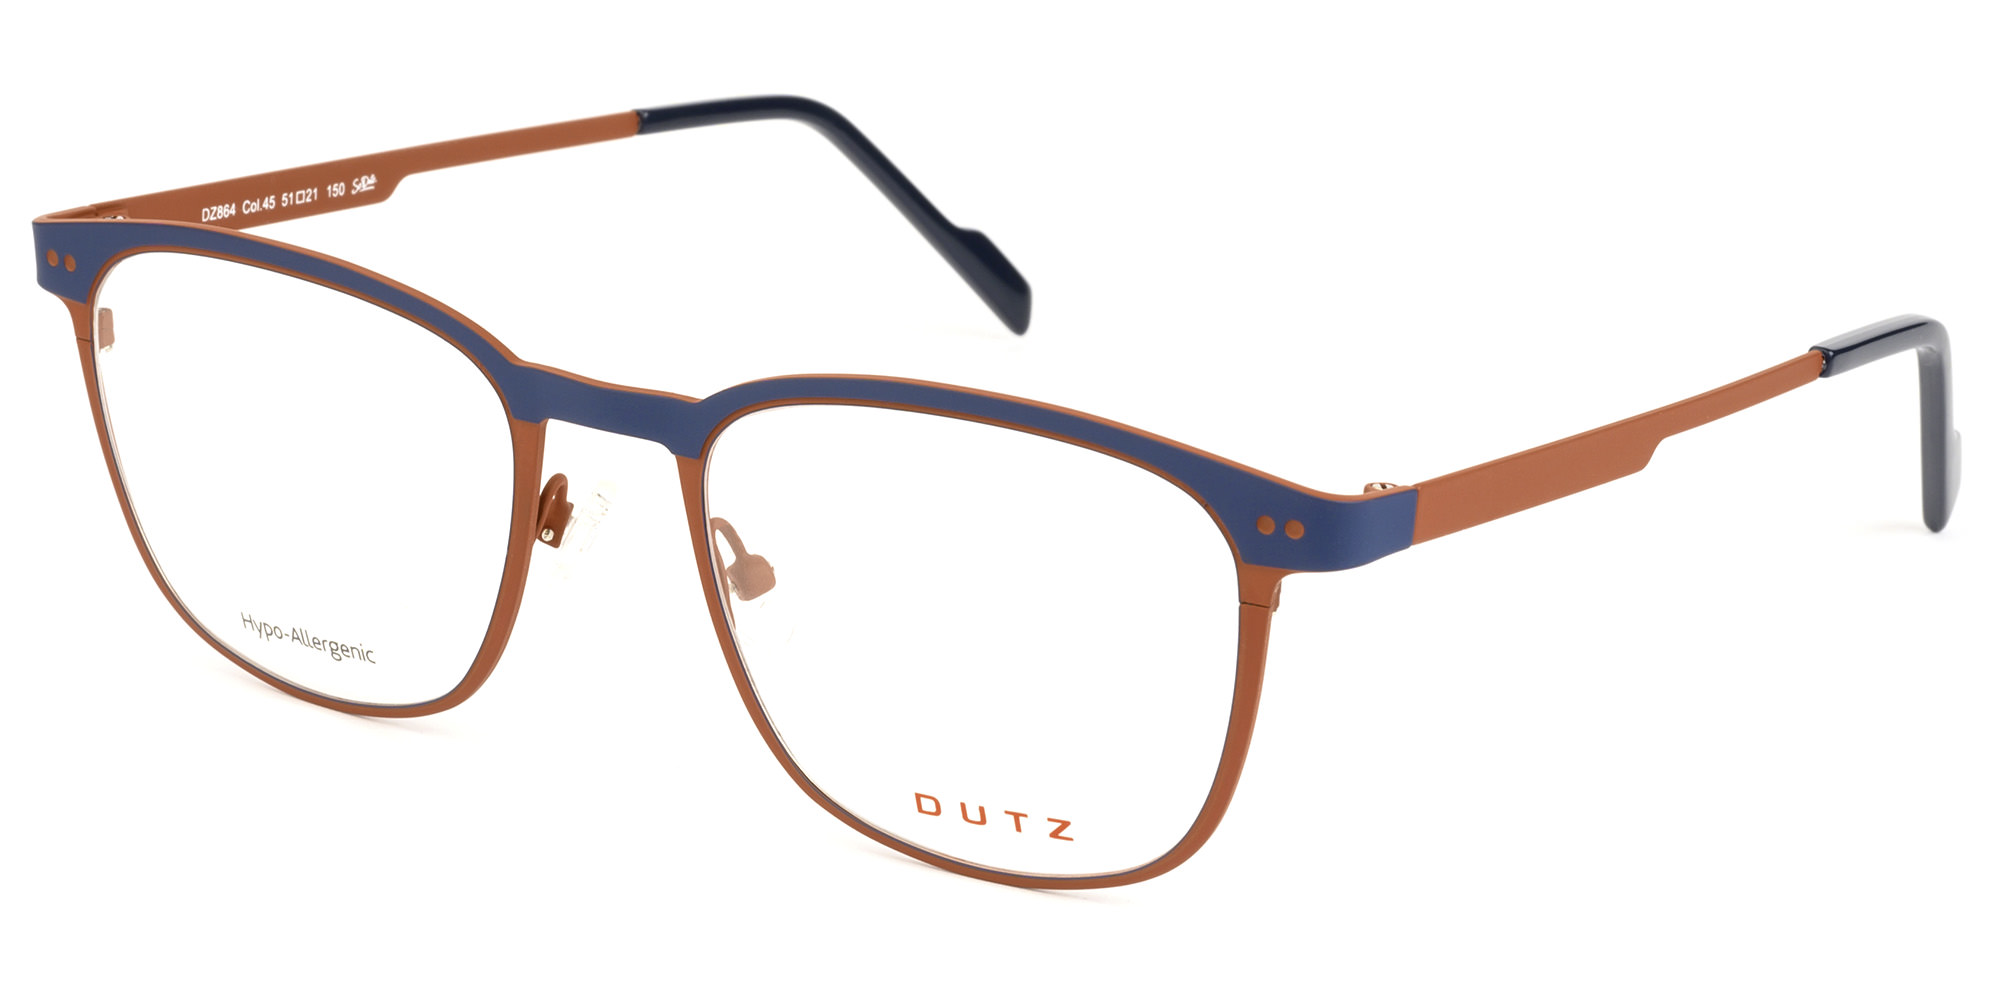 Men's, bicolor, blue combined with brick, metallic frame and temples, with assorted color acetate temple tips